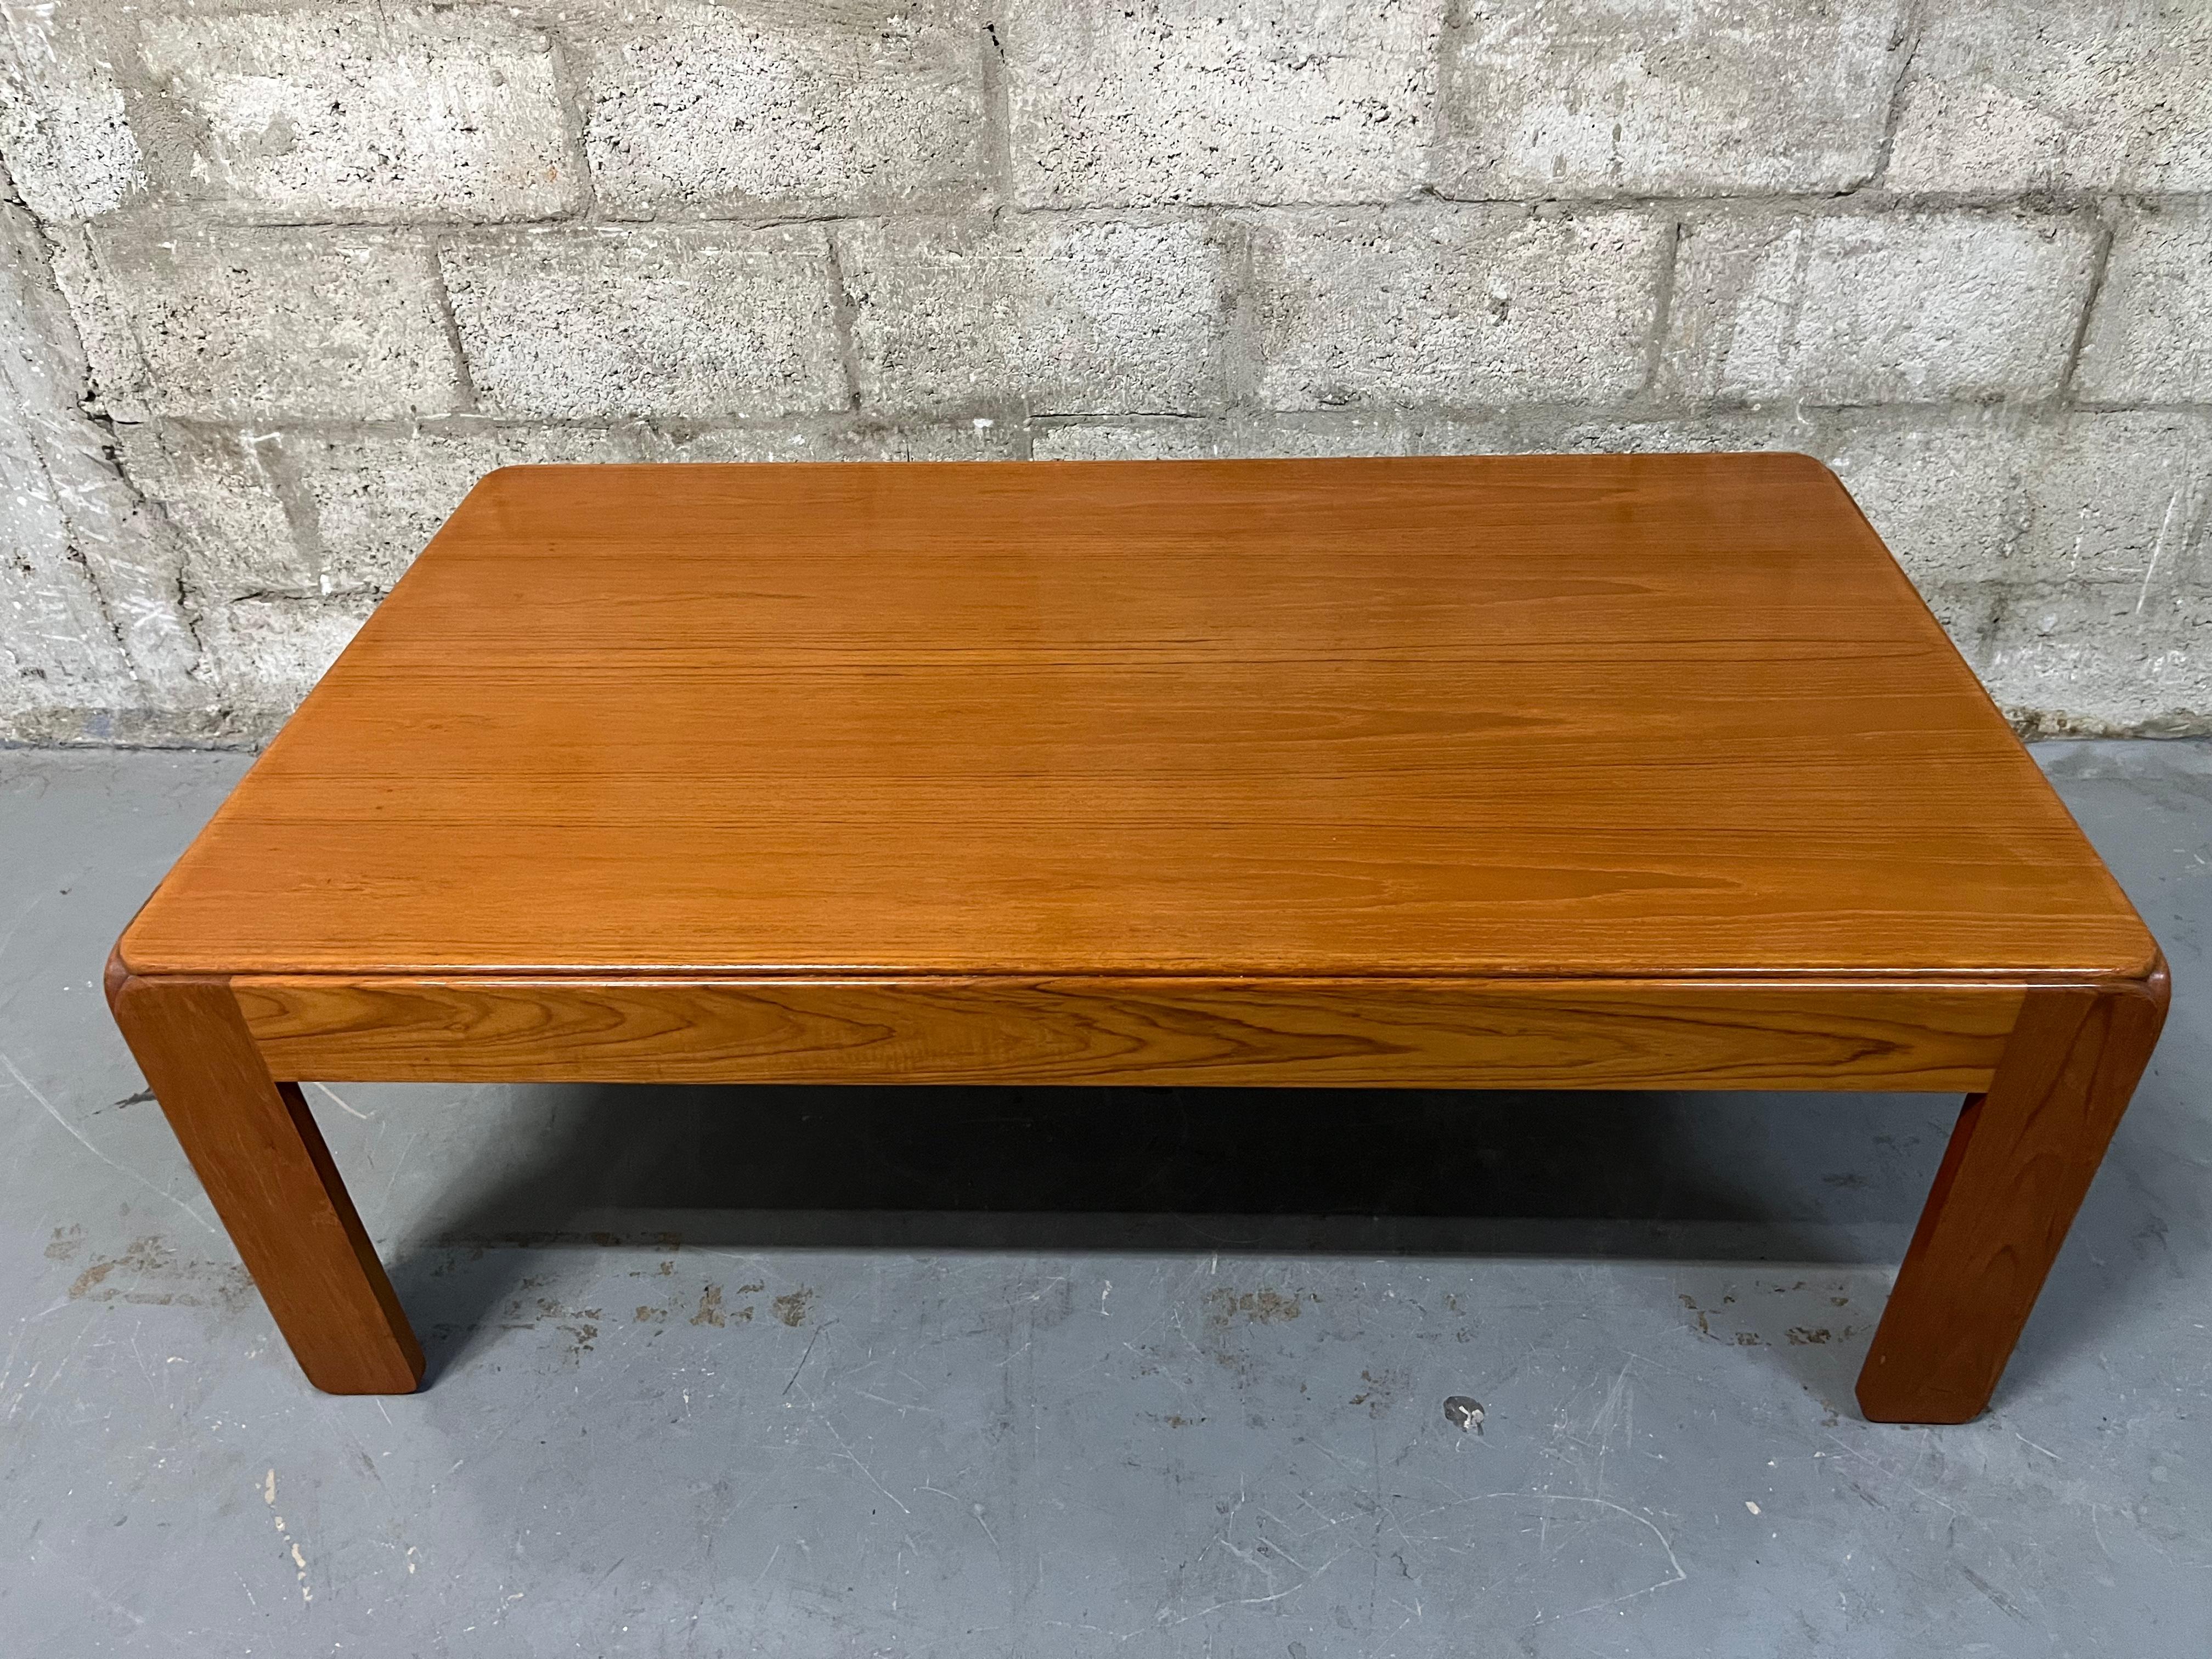  Vintage Mid-Century Modern Danish Teak Coffee Table by Niels Eilersen. Circa 1970s
Features a sleek Mid-Century Modern Scandinavian design, with rounded corners, and a beautiful teak wood grain. 
In excellent original condition with minor signs of